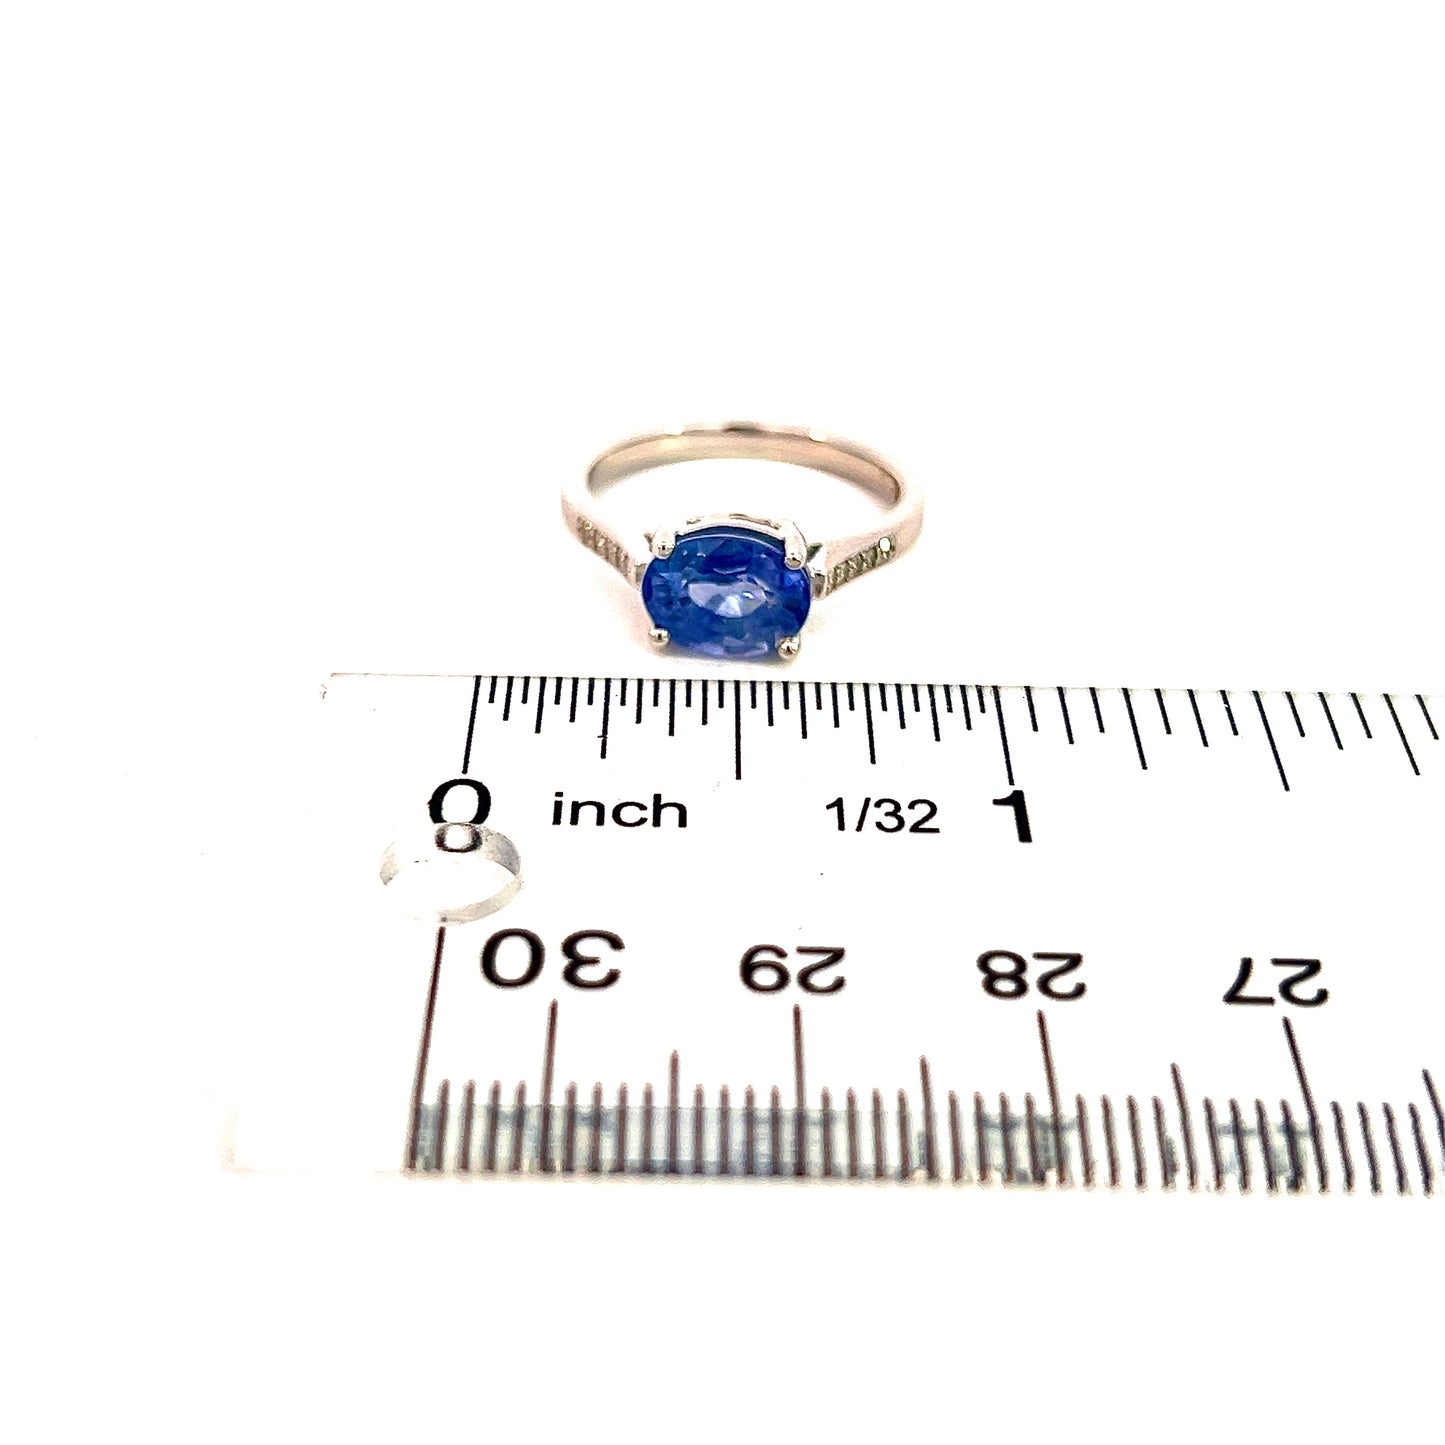 Natural Sapphire Diamond Ring 6.5 14k White Gold 2.36 TCW Certified $3,950 310592 - Certified Fine Jewelry